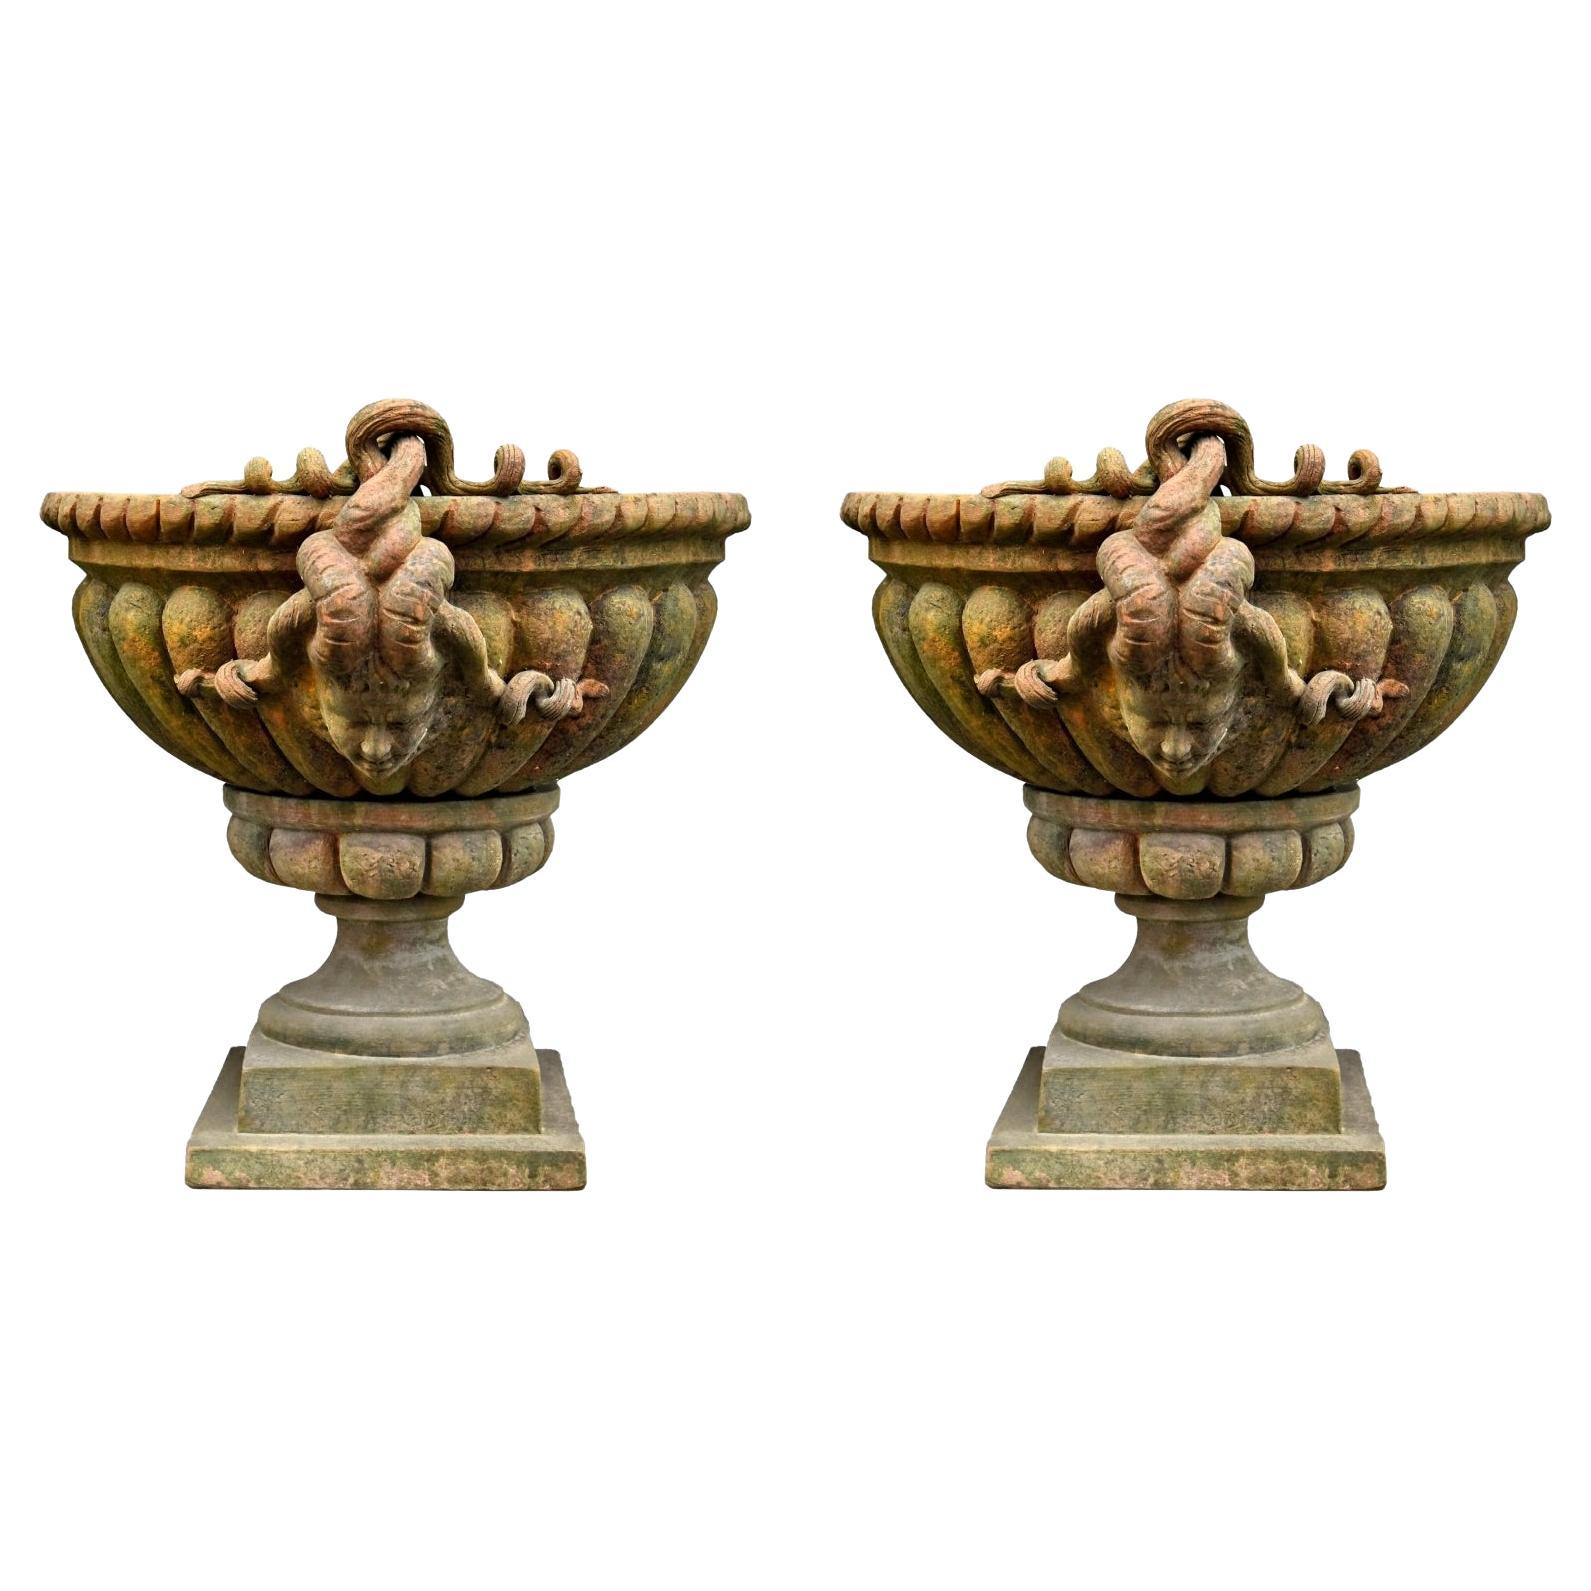 Pair of Baccellato Vases with Medusa Heads Terracotta Goblet, 19th Century For Sale